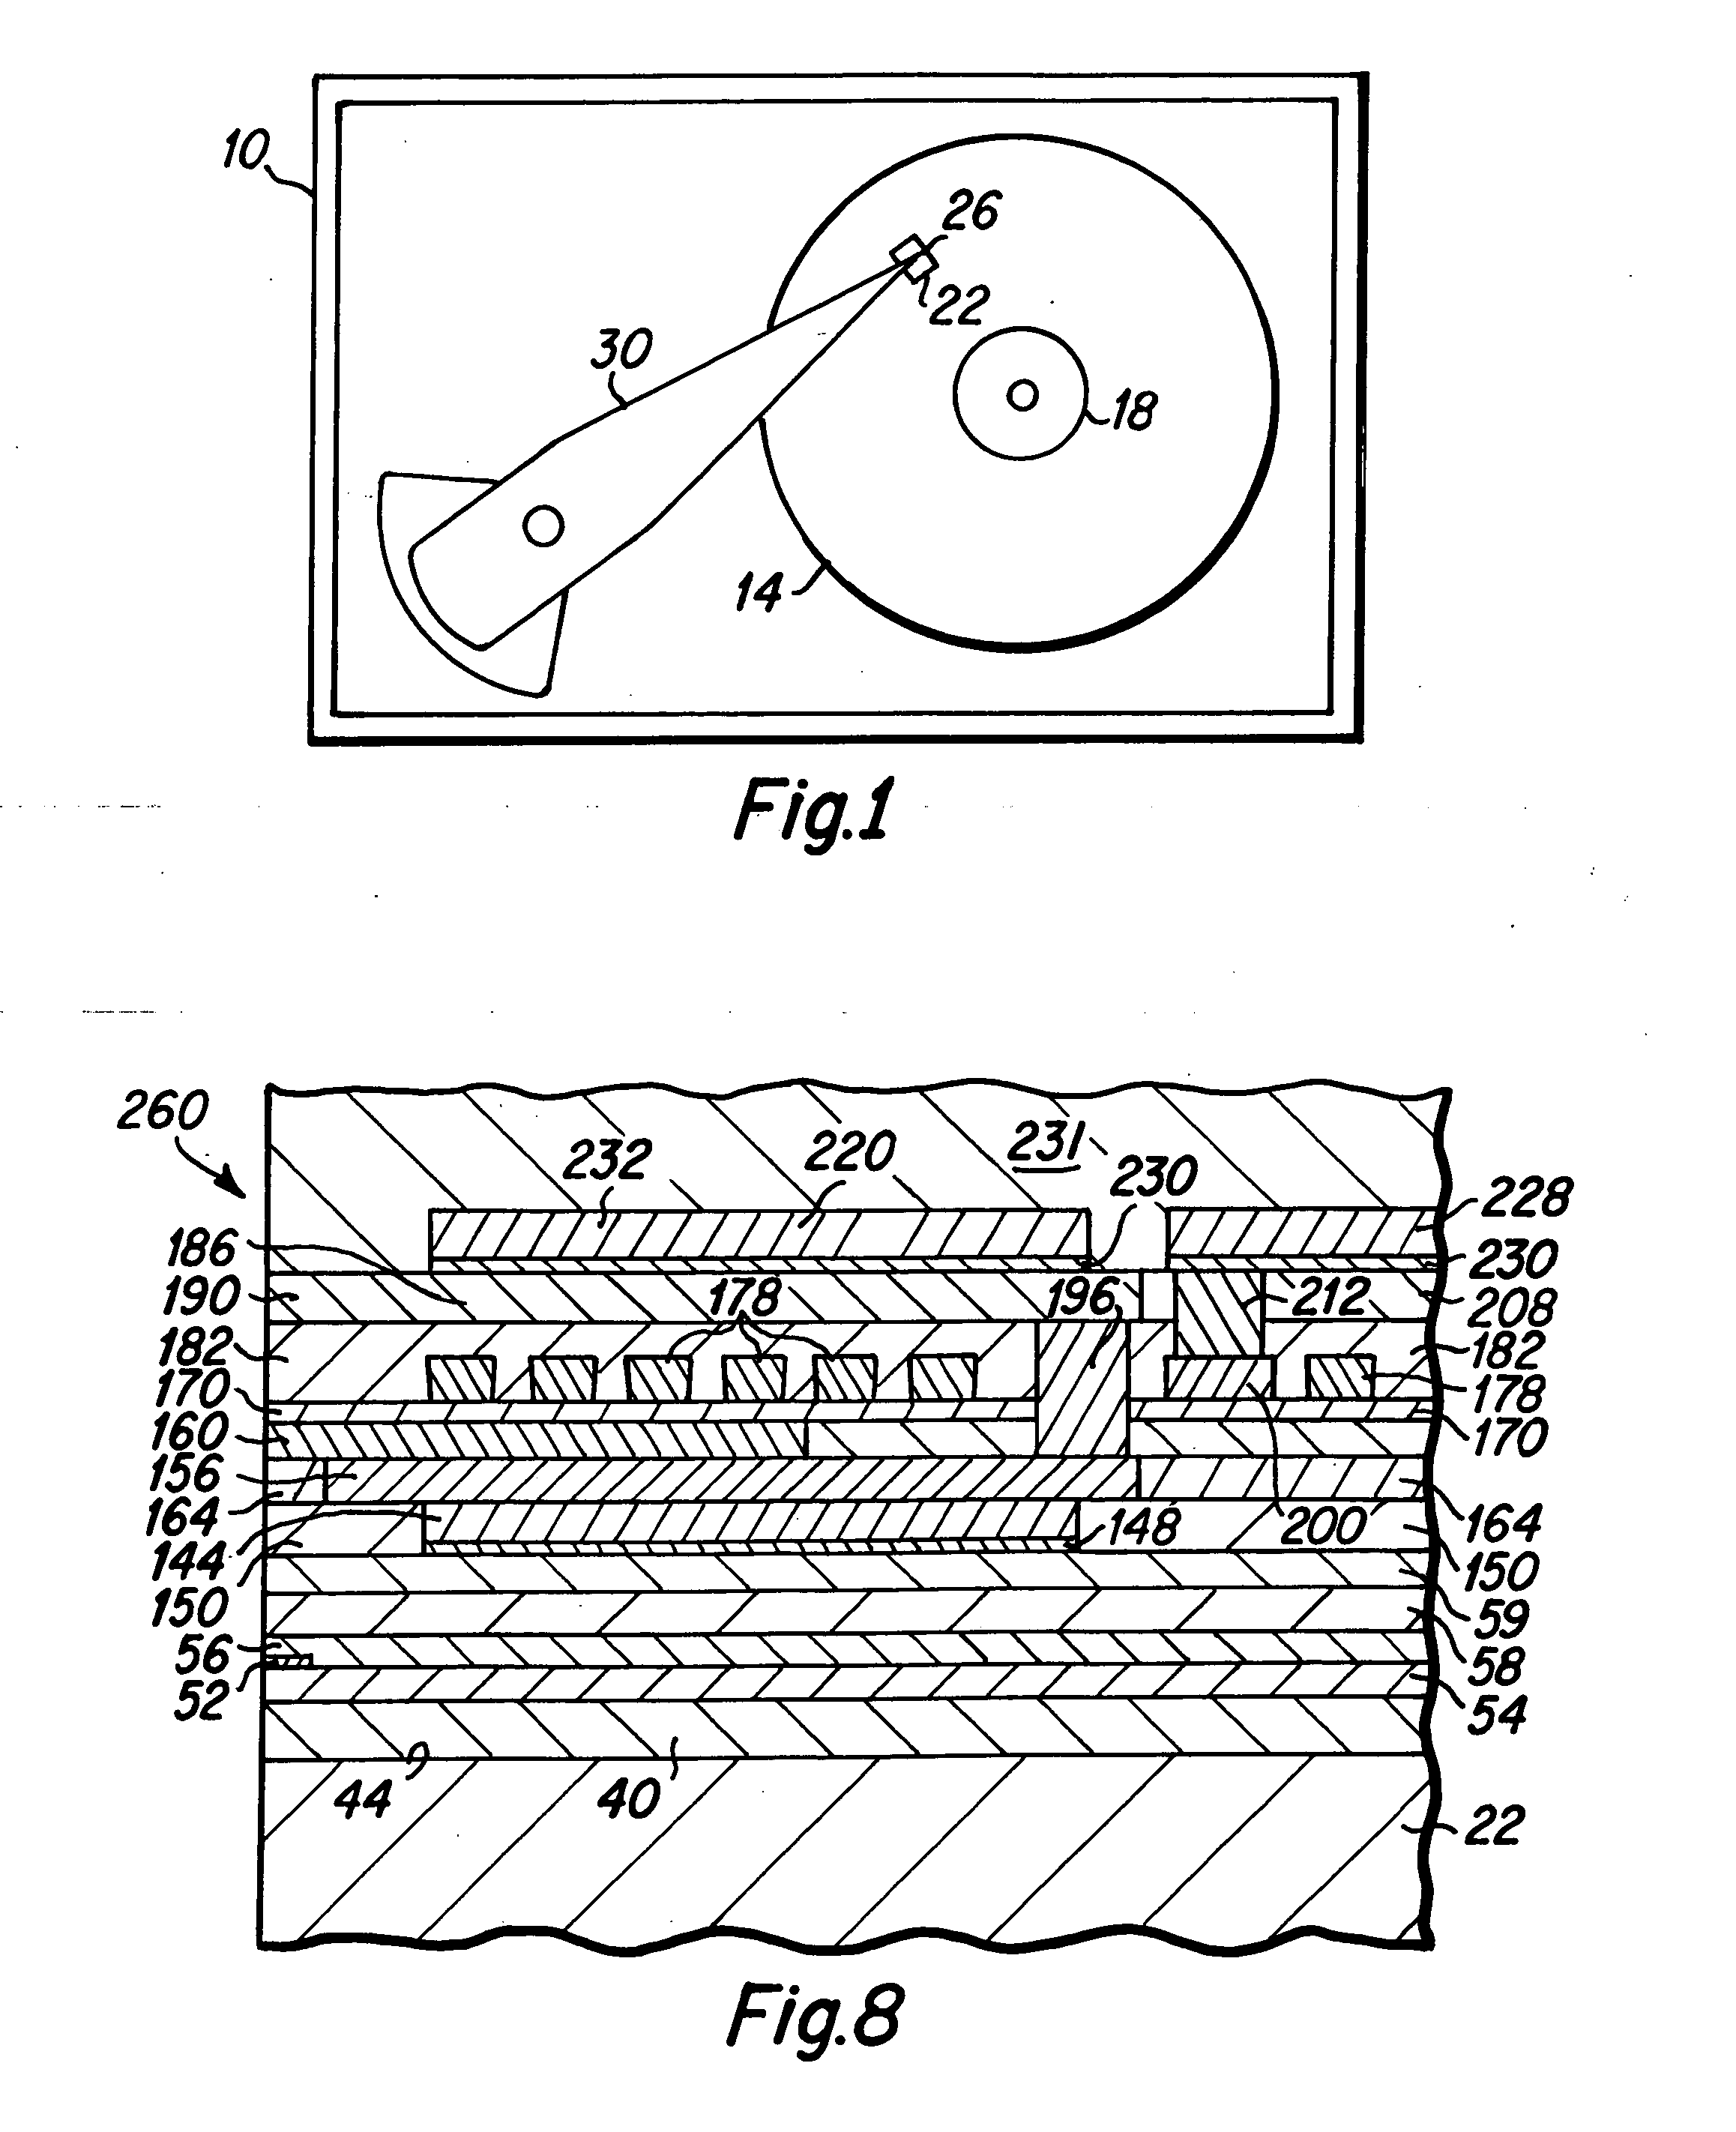 Heat sink structure in an inductive write head and fabrication process therefor